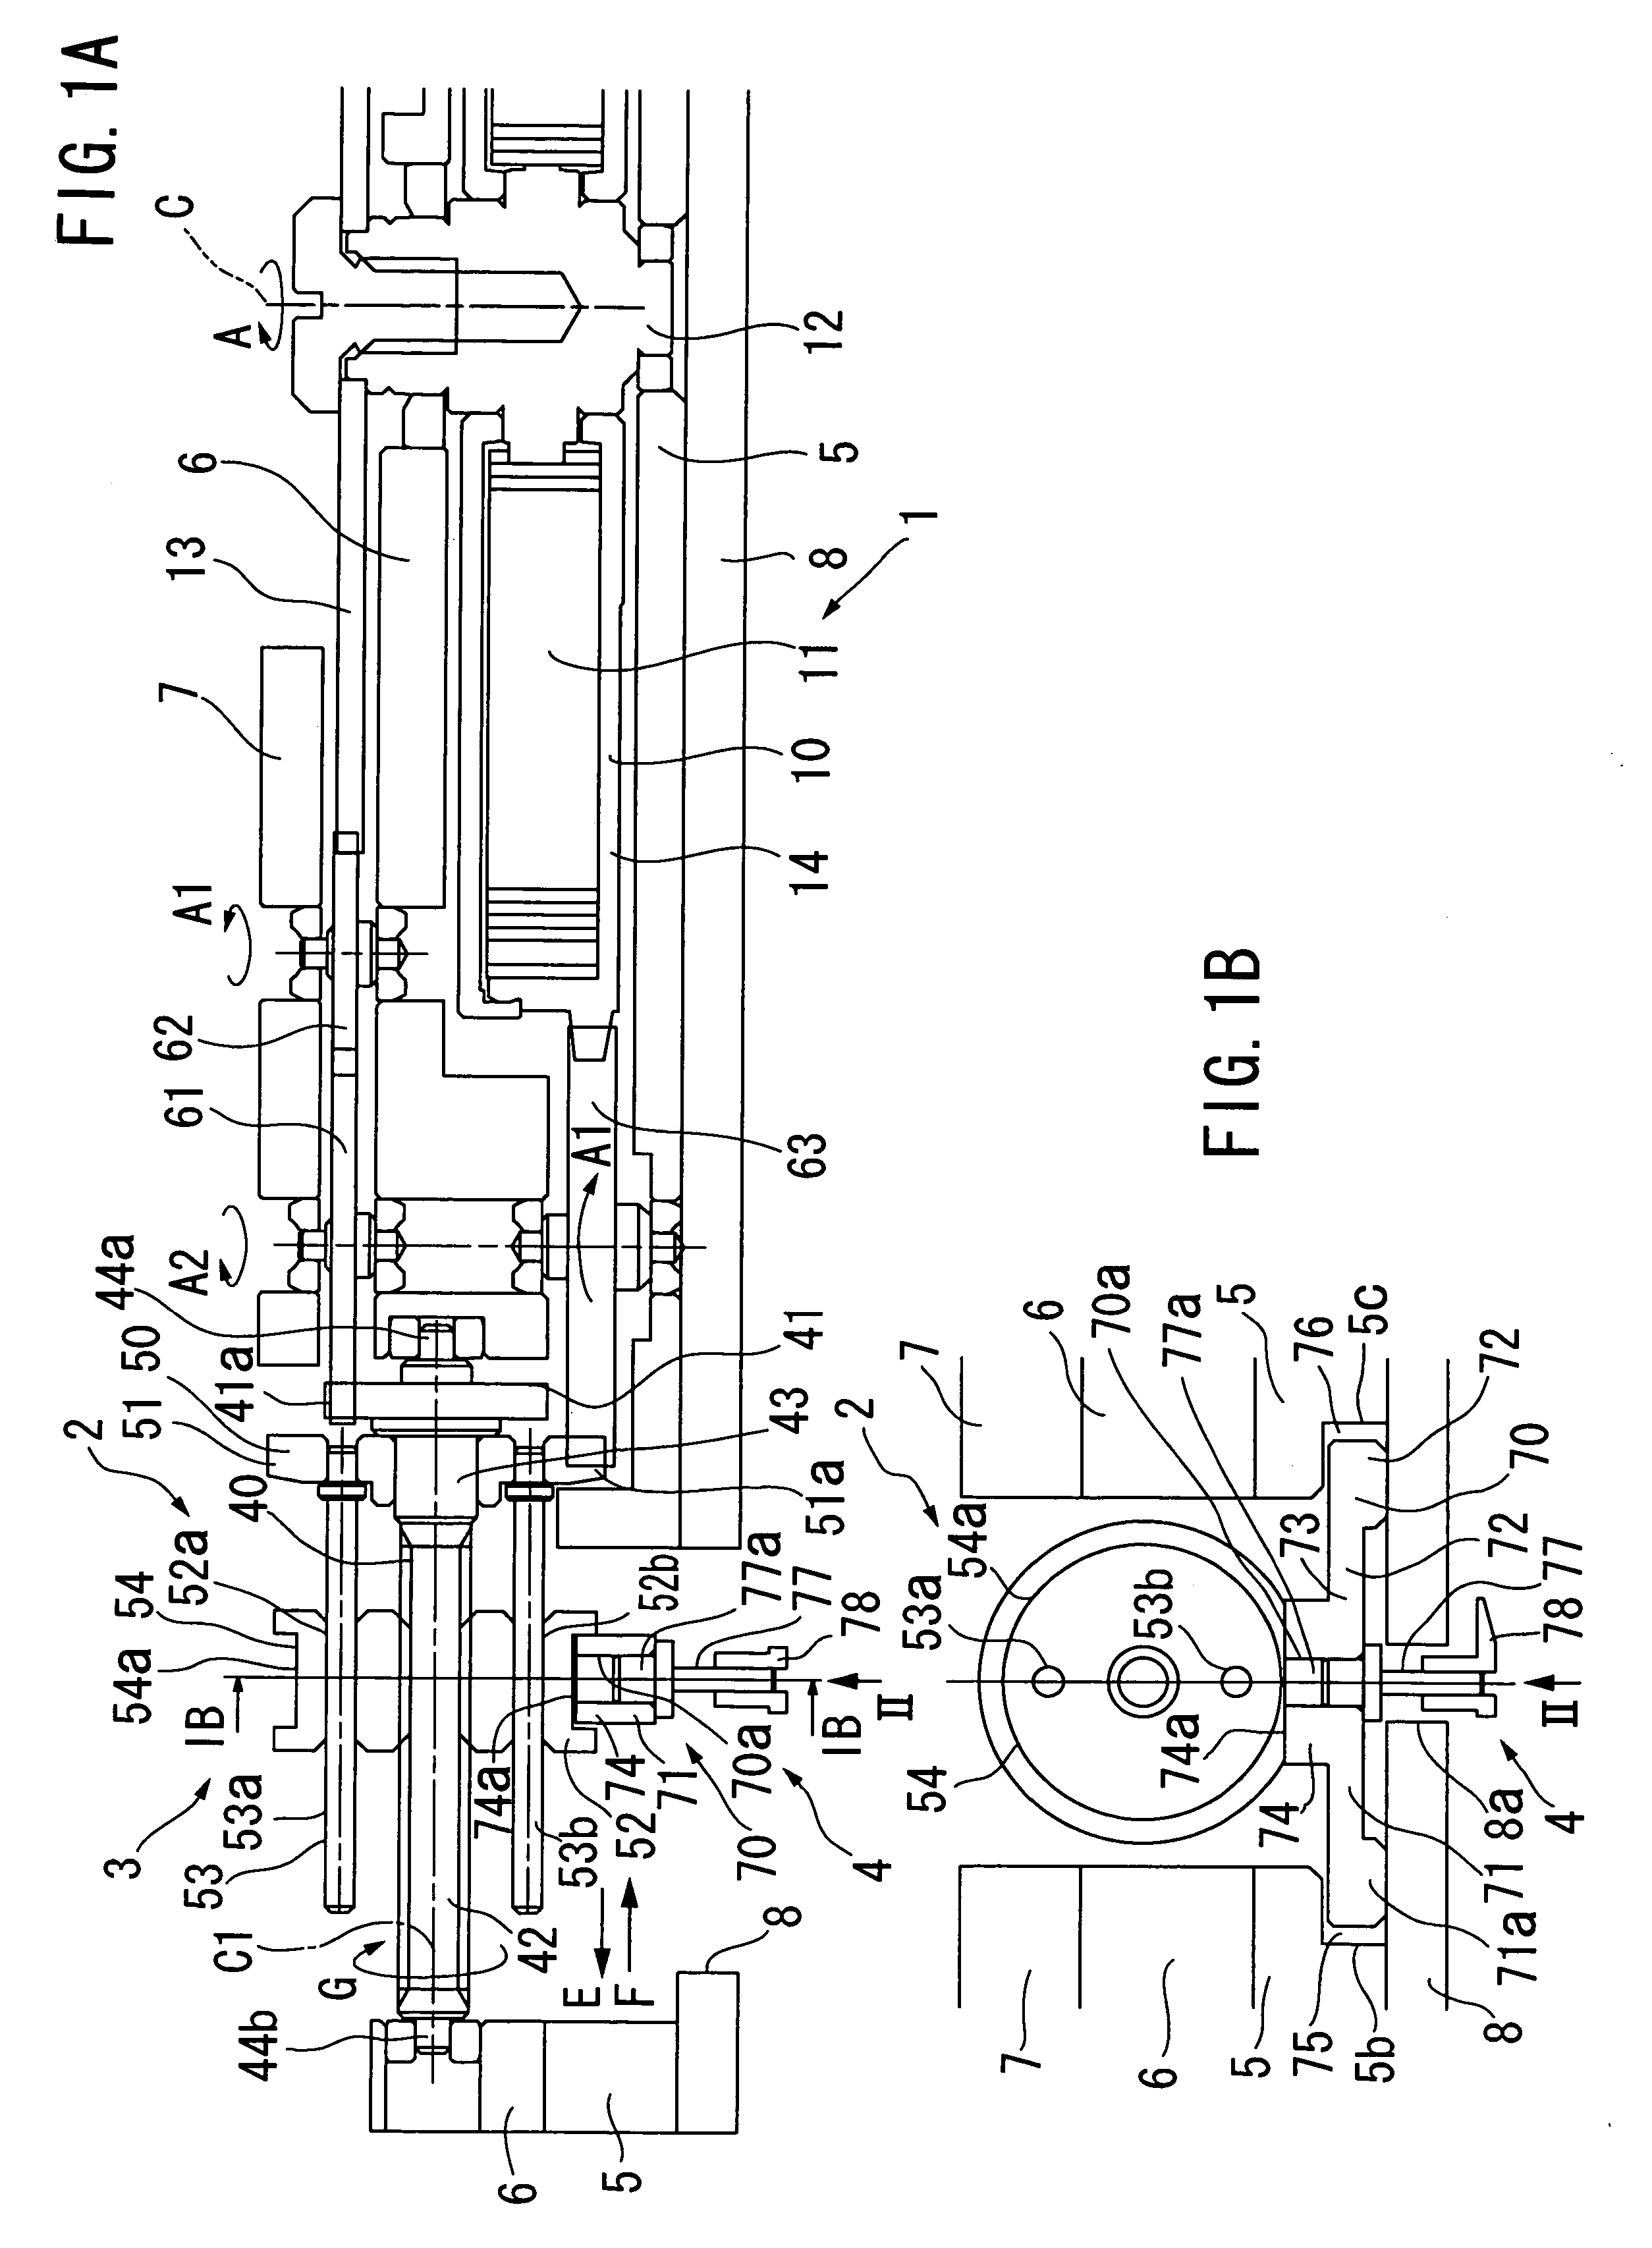 Power reserve display mechanism and mechanical timepiece having the same